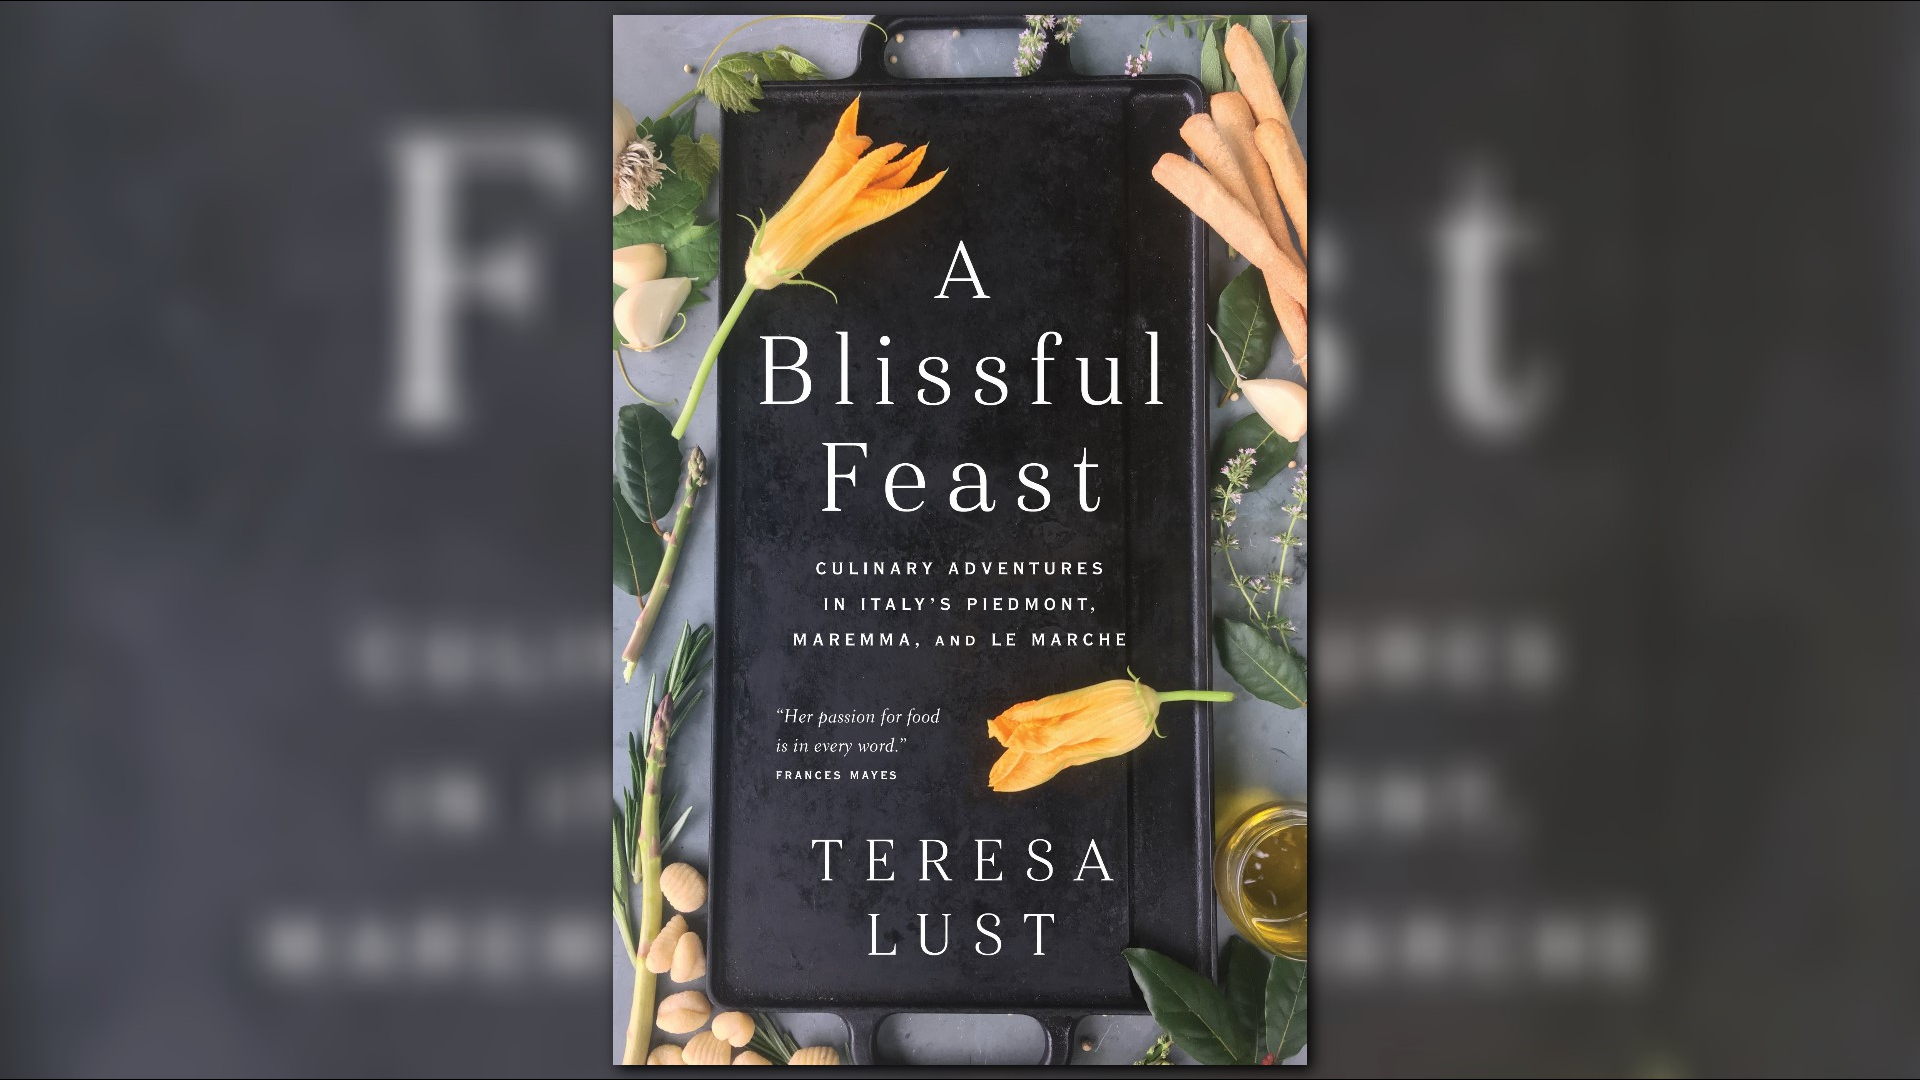 Teresa Lust's new book, "A Blissful Feast" weaves mouth-watering recipes with cultural history. Her simple recipe for Gnocchi combines the best of people and food.